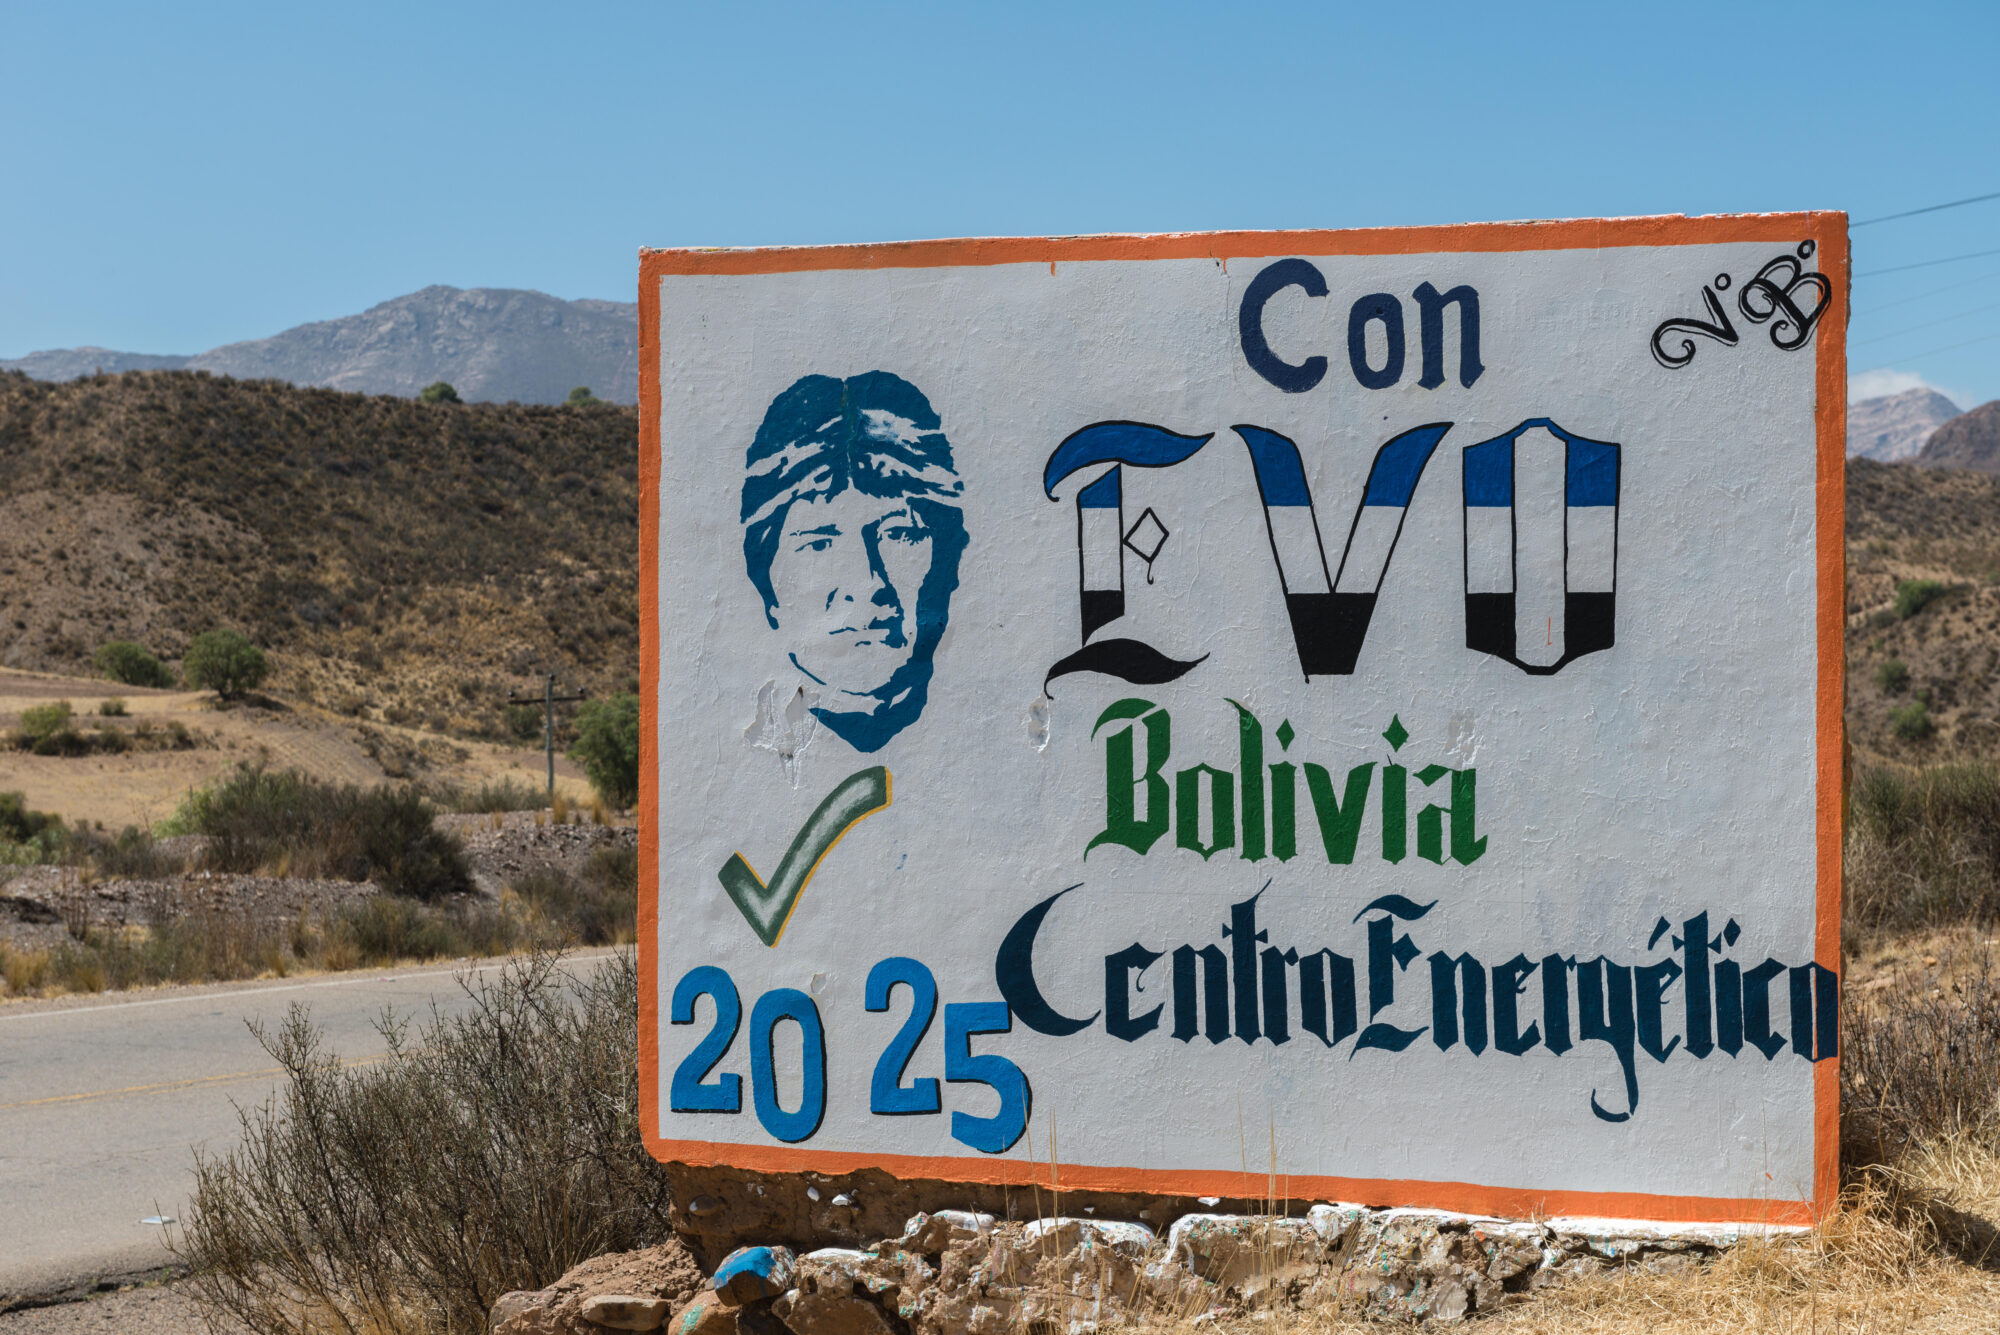 Poster showing former Bolivian President Evo Morales promoting an energy transition plan.